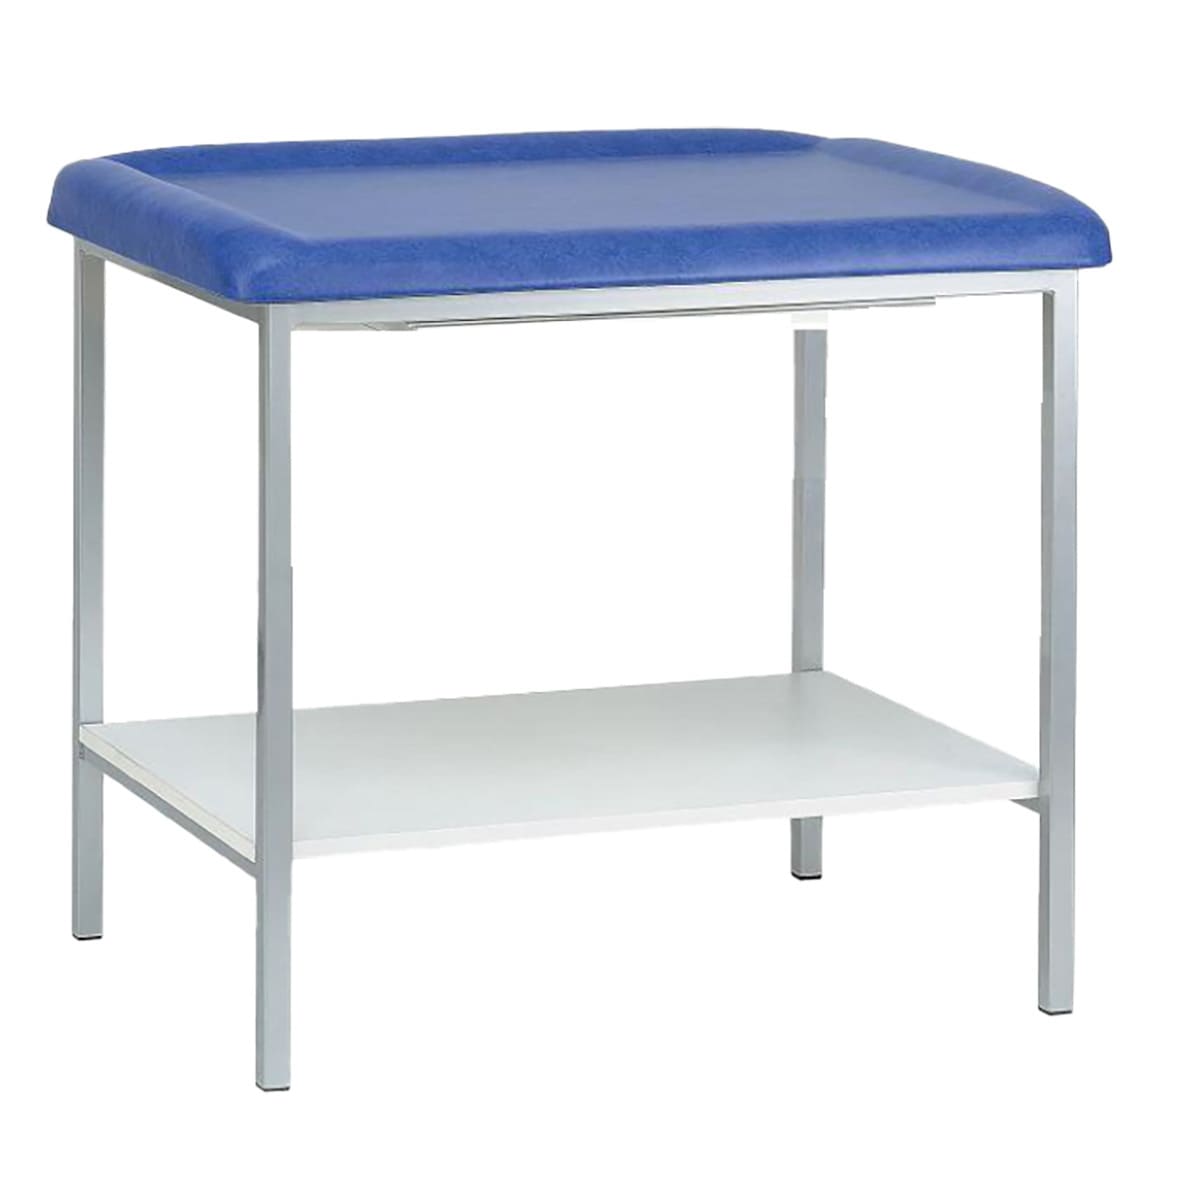 Pediatric table height 86cm, 1 section, with tray